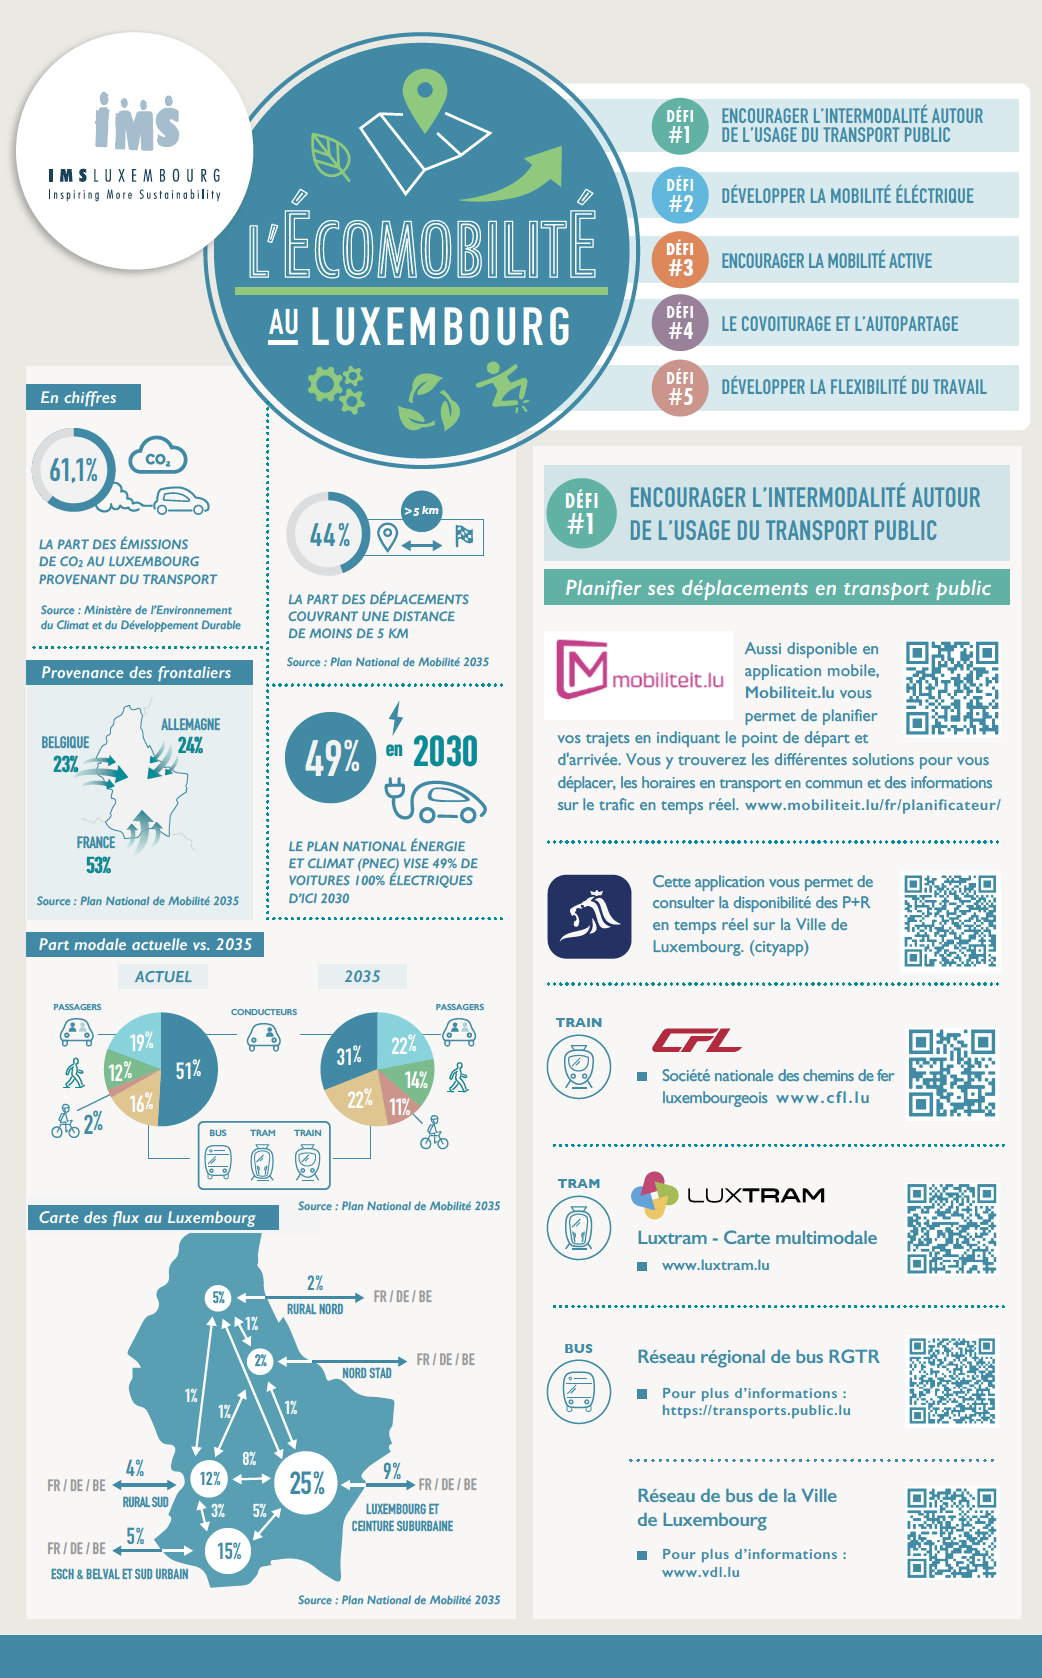 Ecomobility in Luxembourg - leaflet